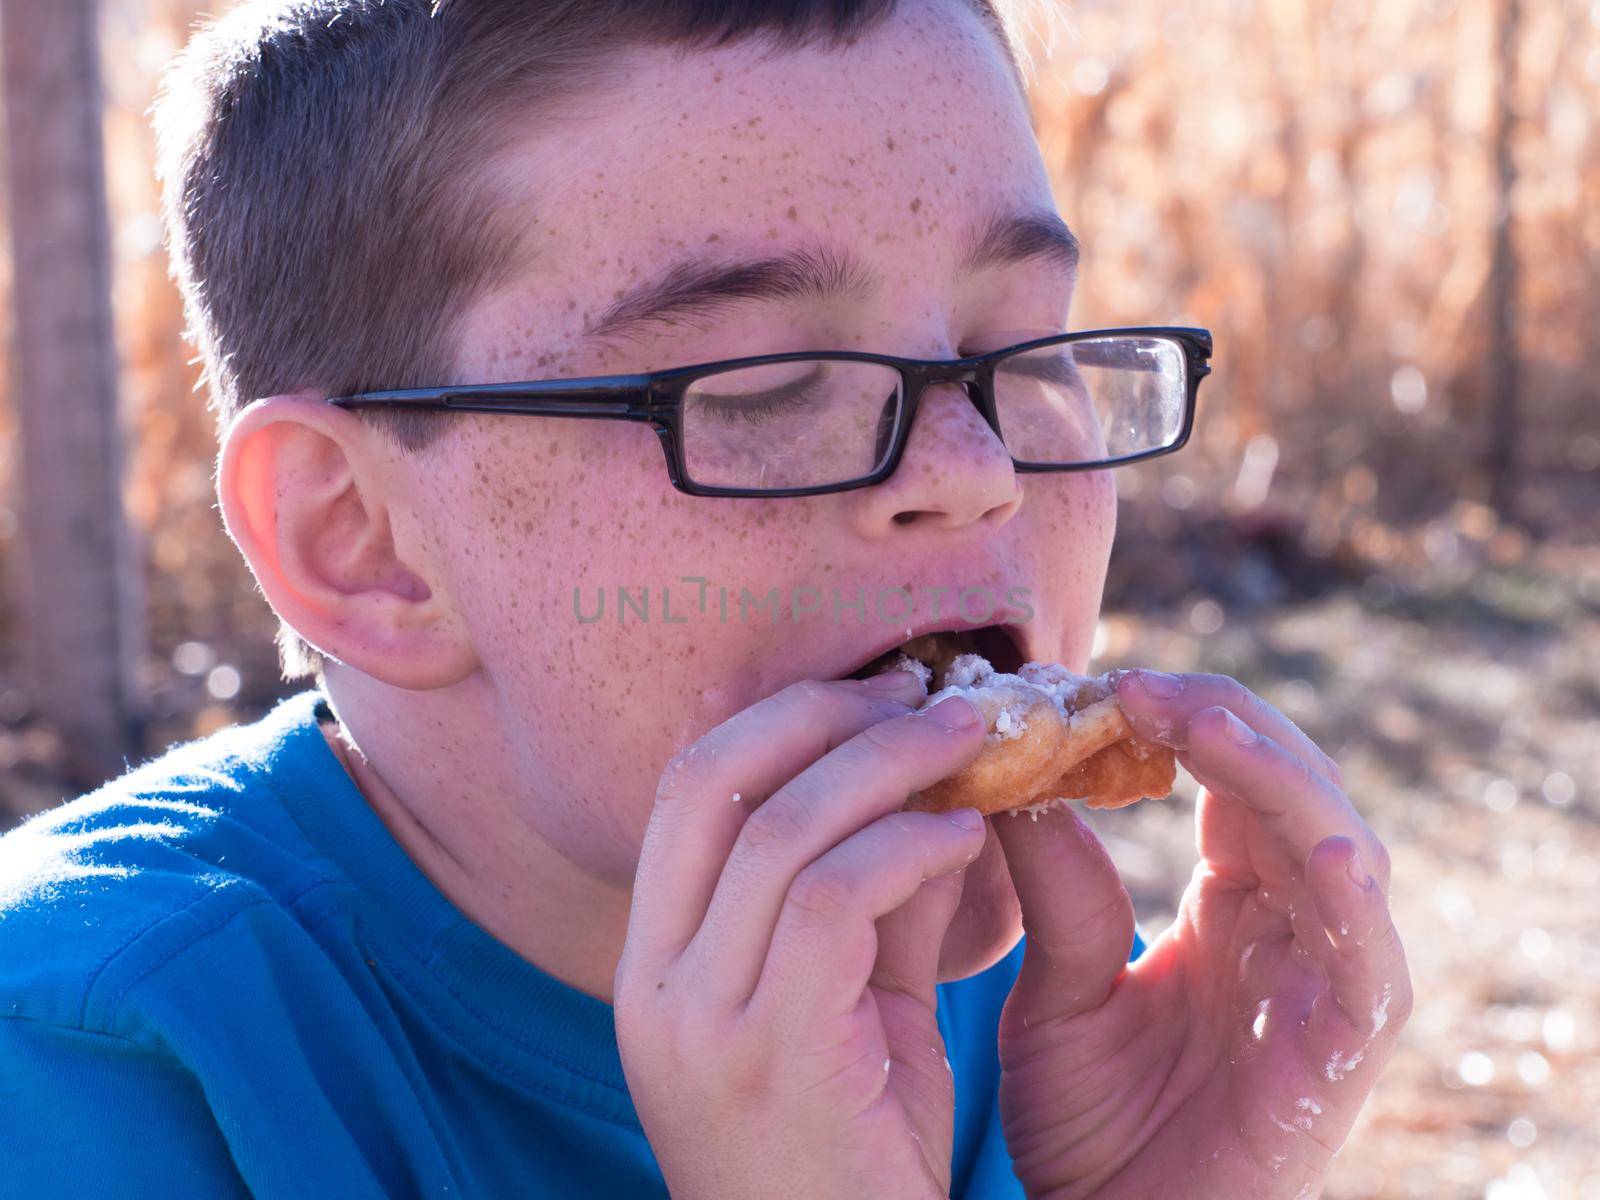 Young boy eating funnel cake in corn field.